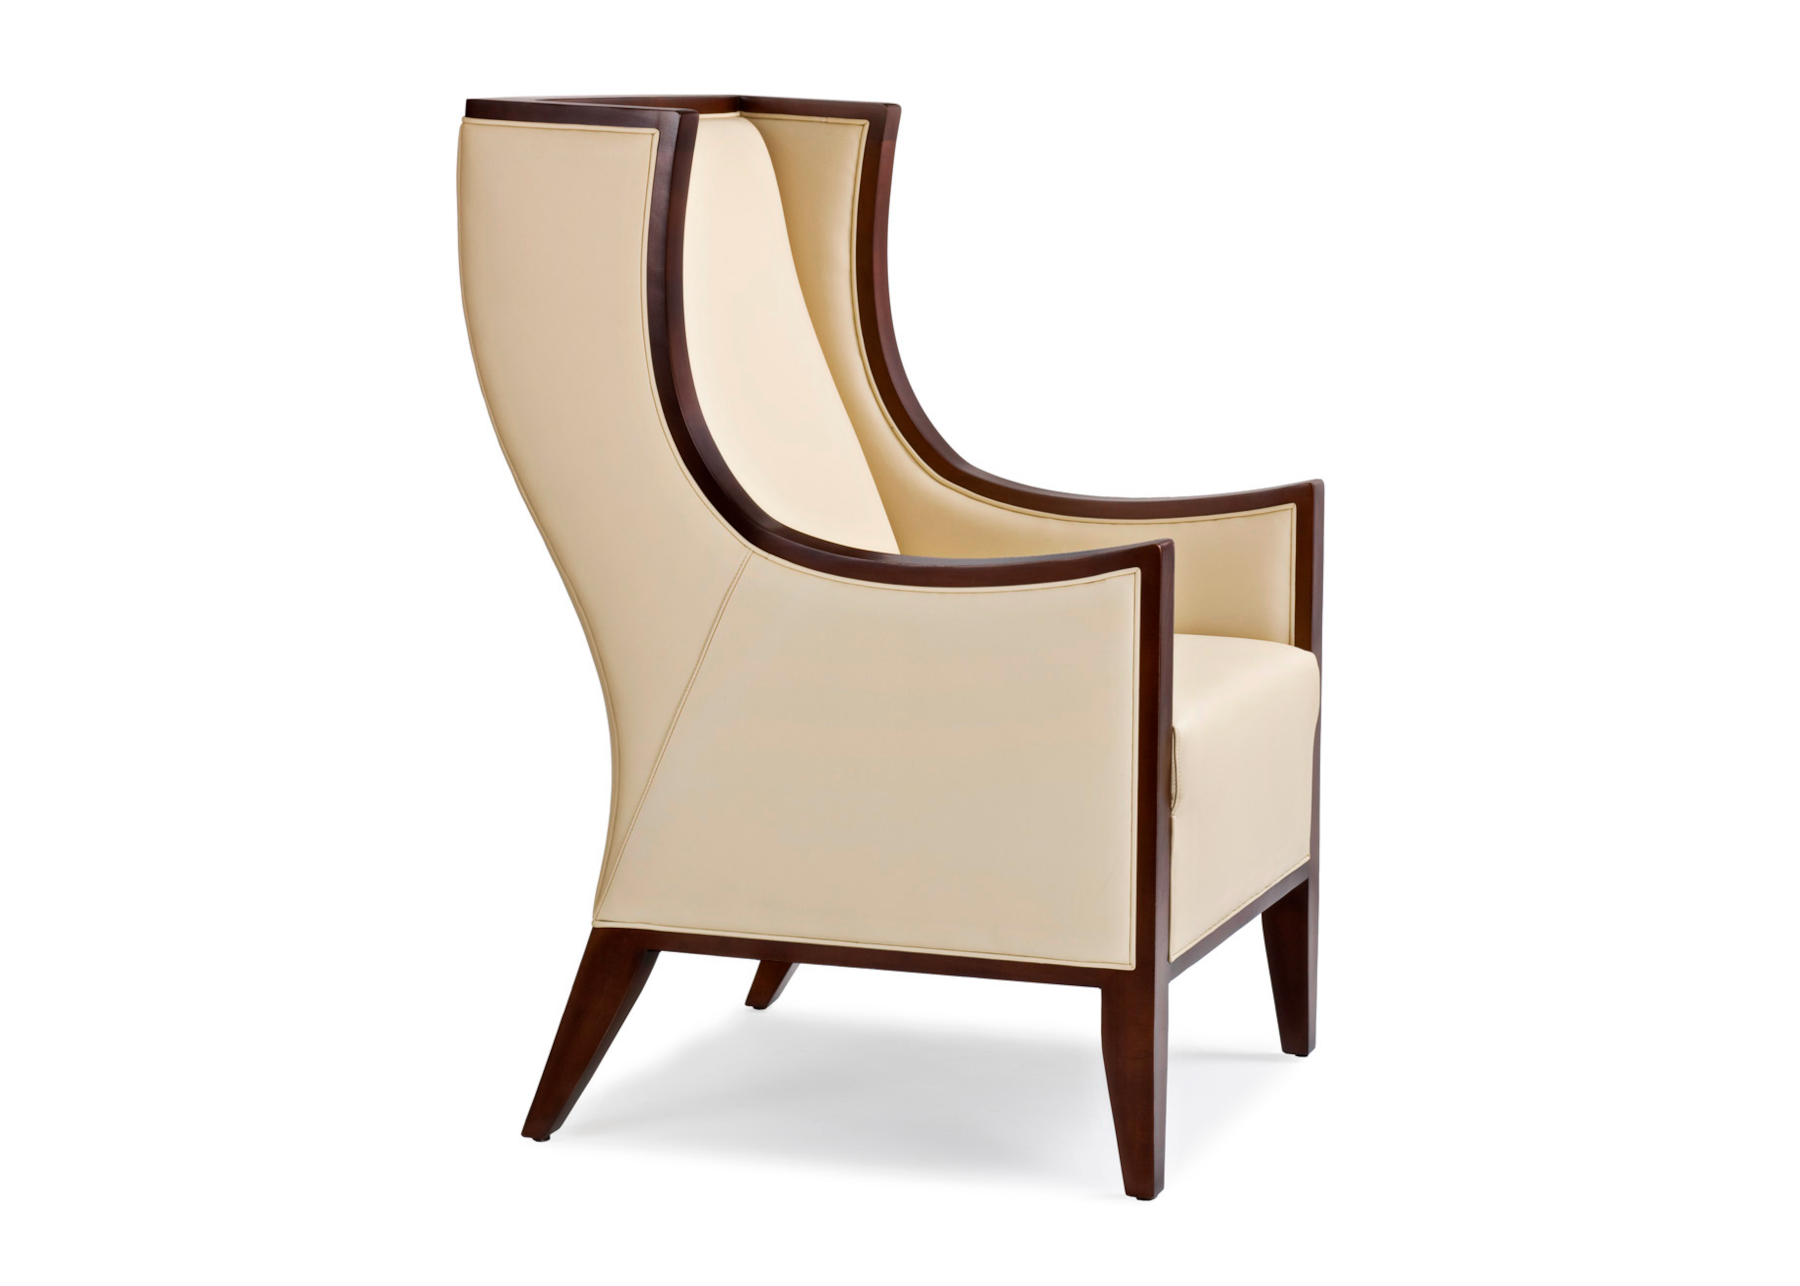  LUXE I I CHAIR